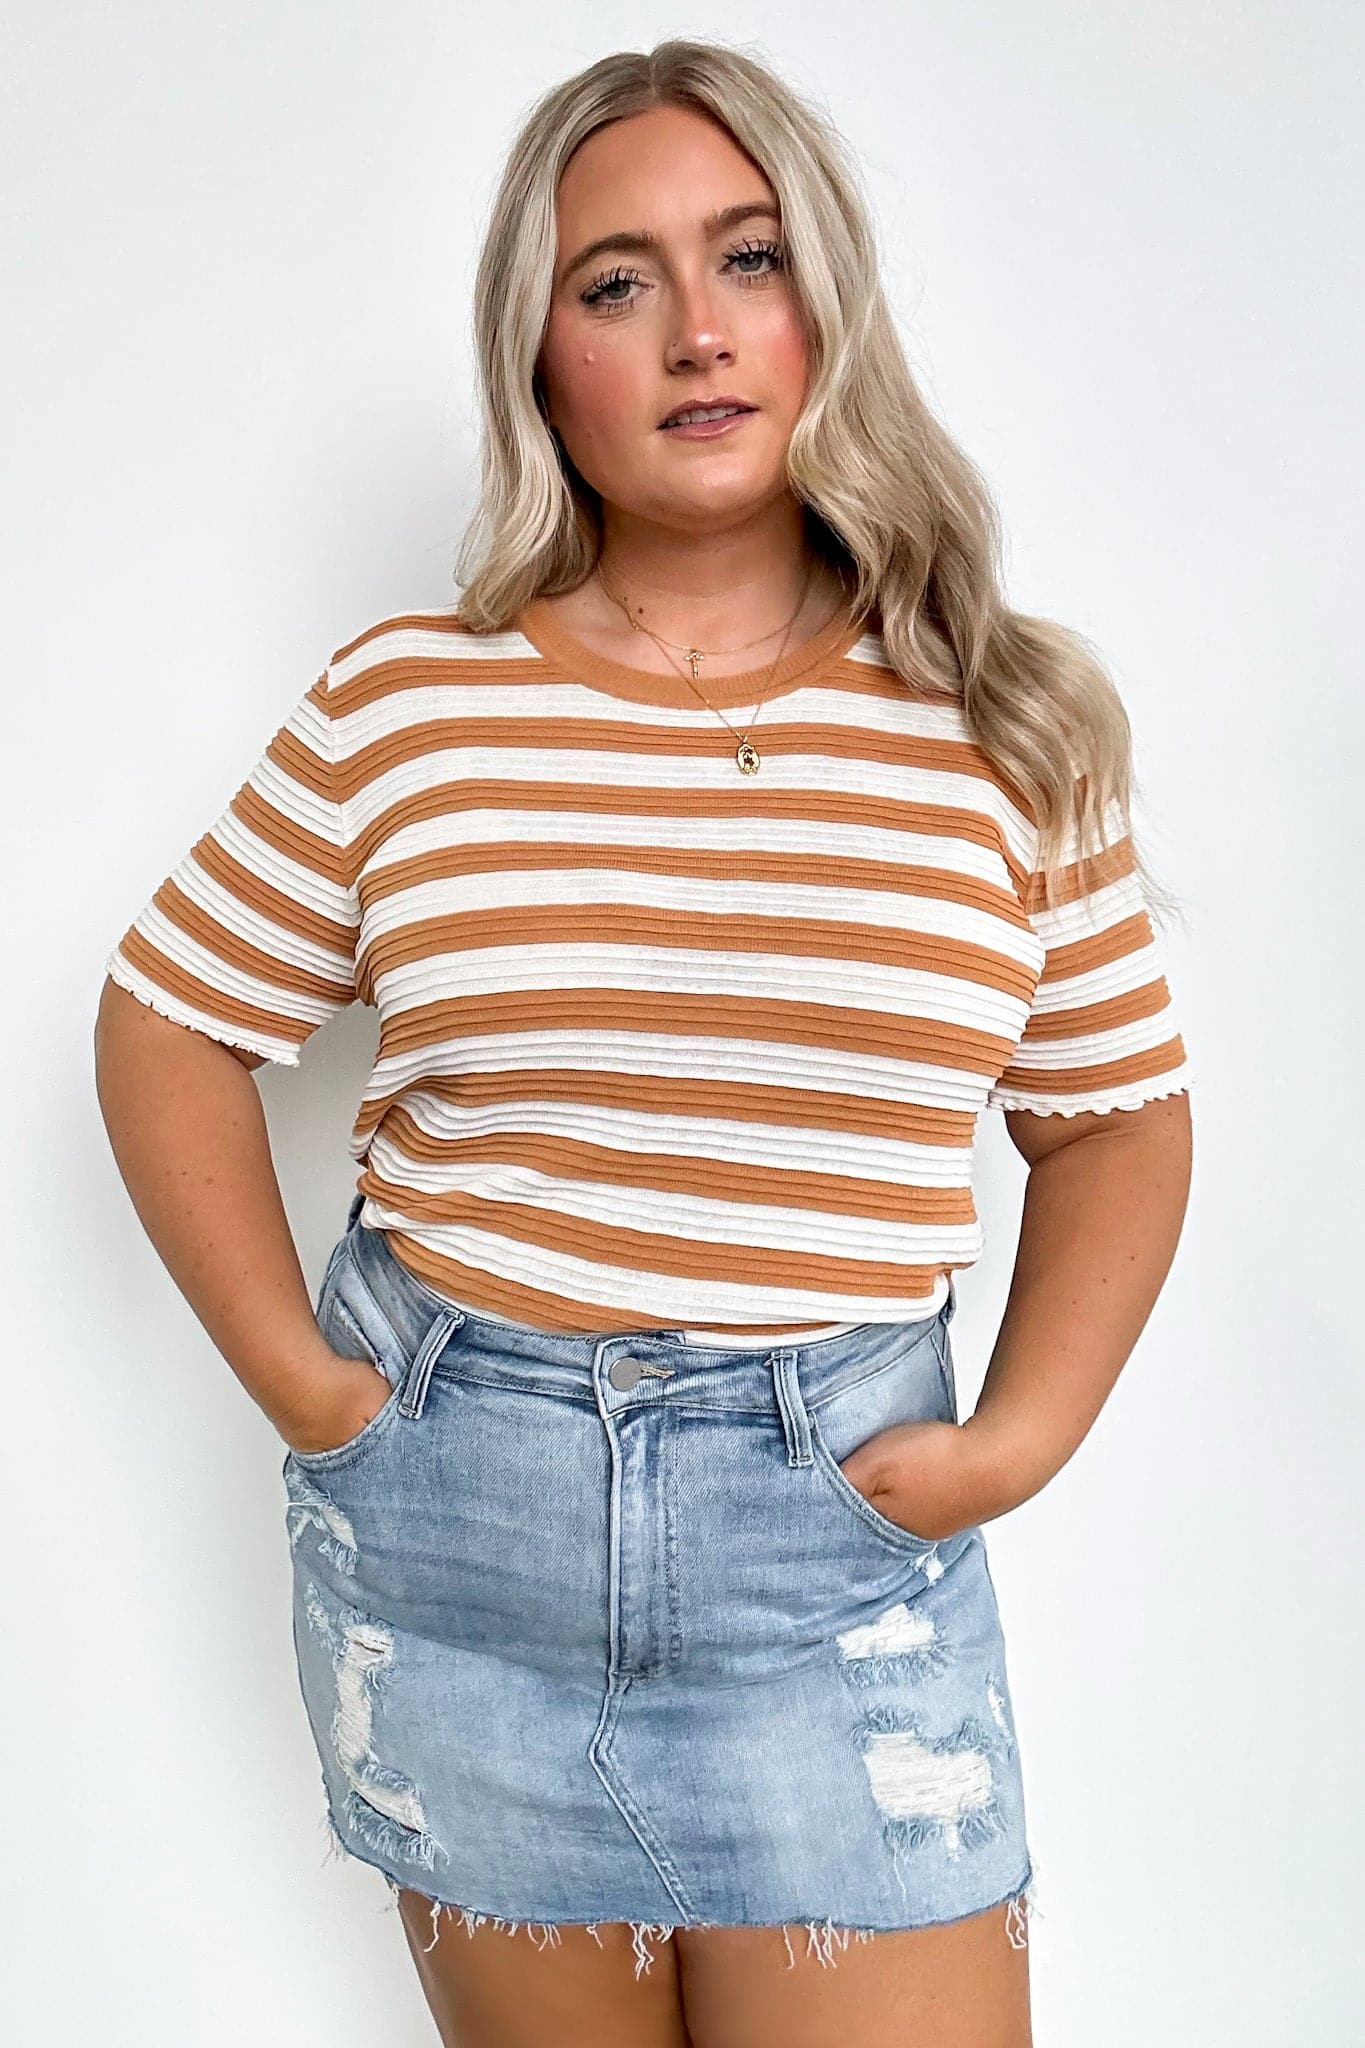  Dren Striped Textured Knit Top - FINAL SALE - Madison and Mallory